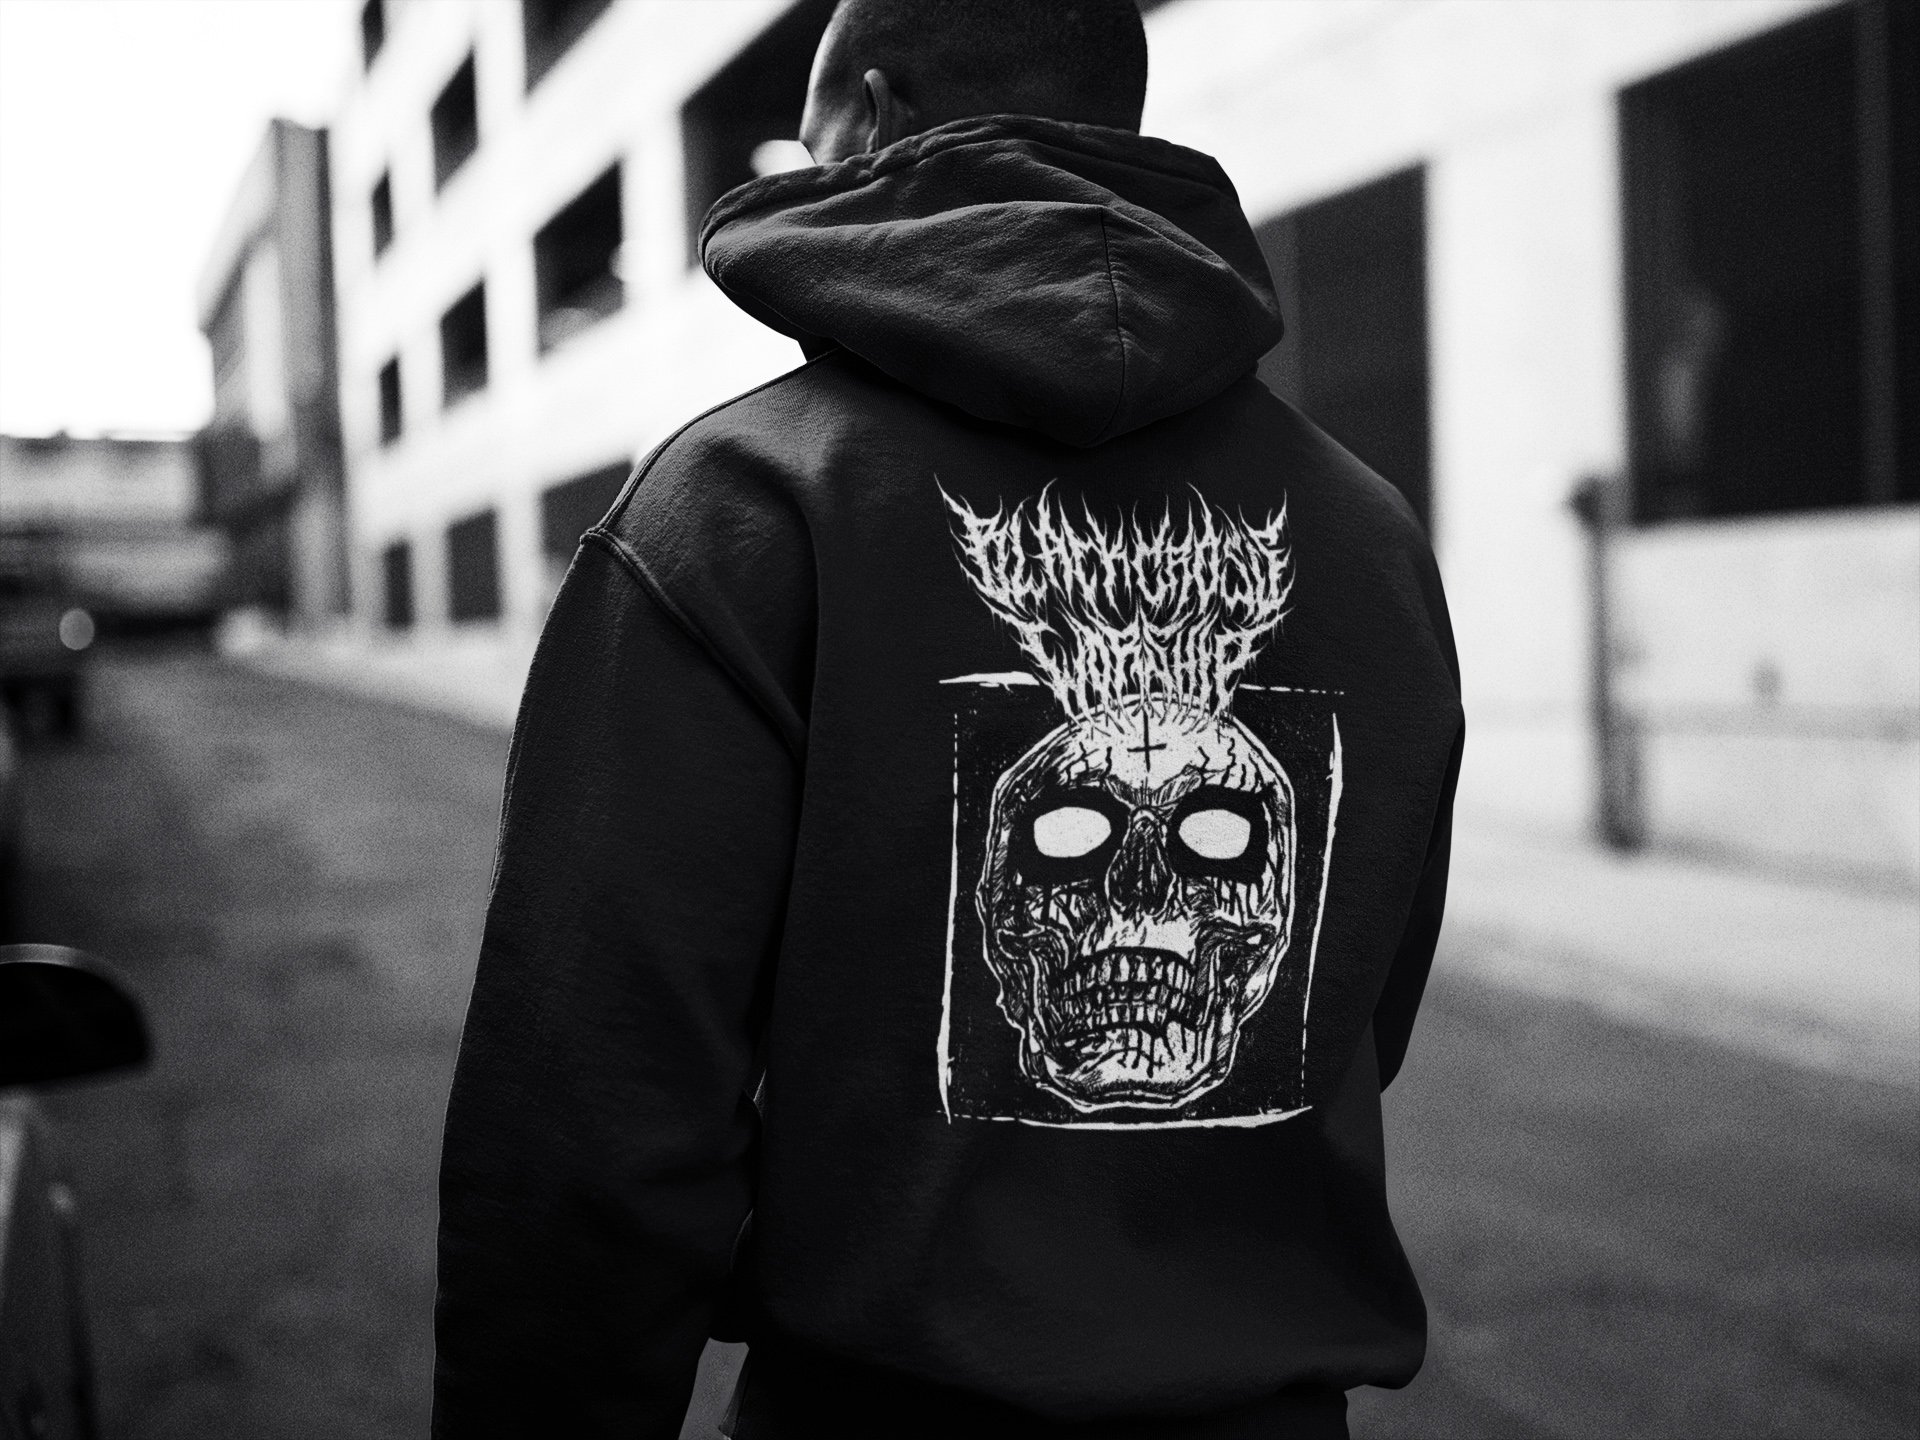  Bands and Bones Tribal Skull 3 Gothic Rockwear Men's Hoodie, S  Black : Clothing, Shoes & Jewelry